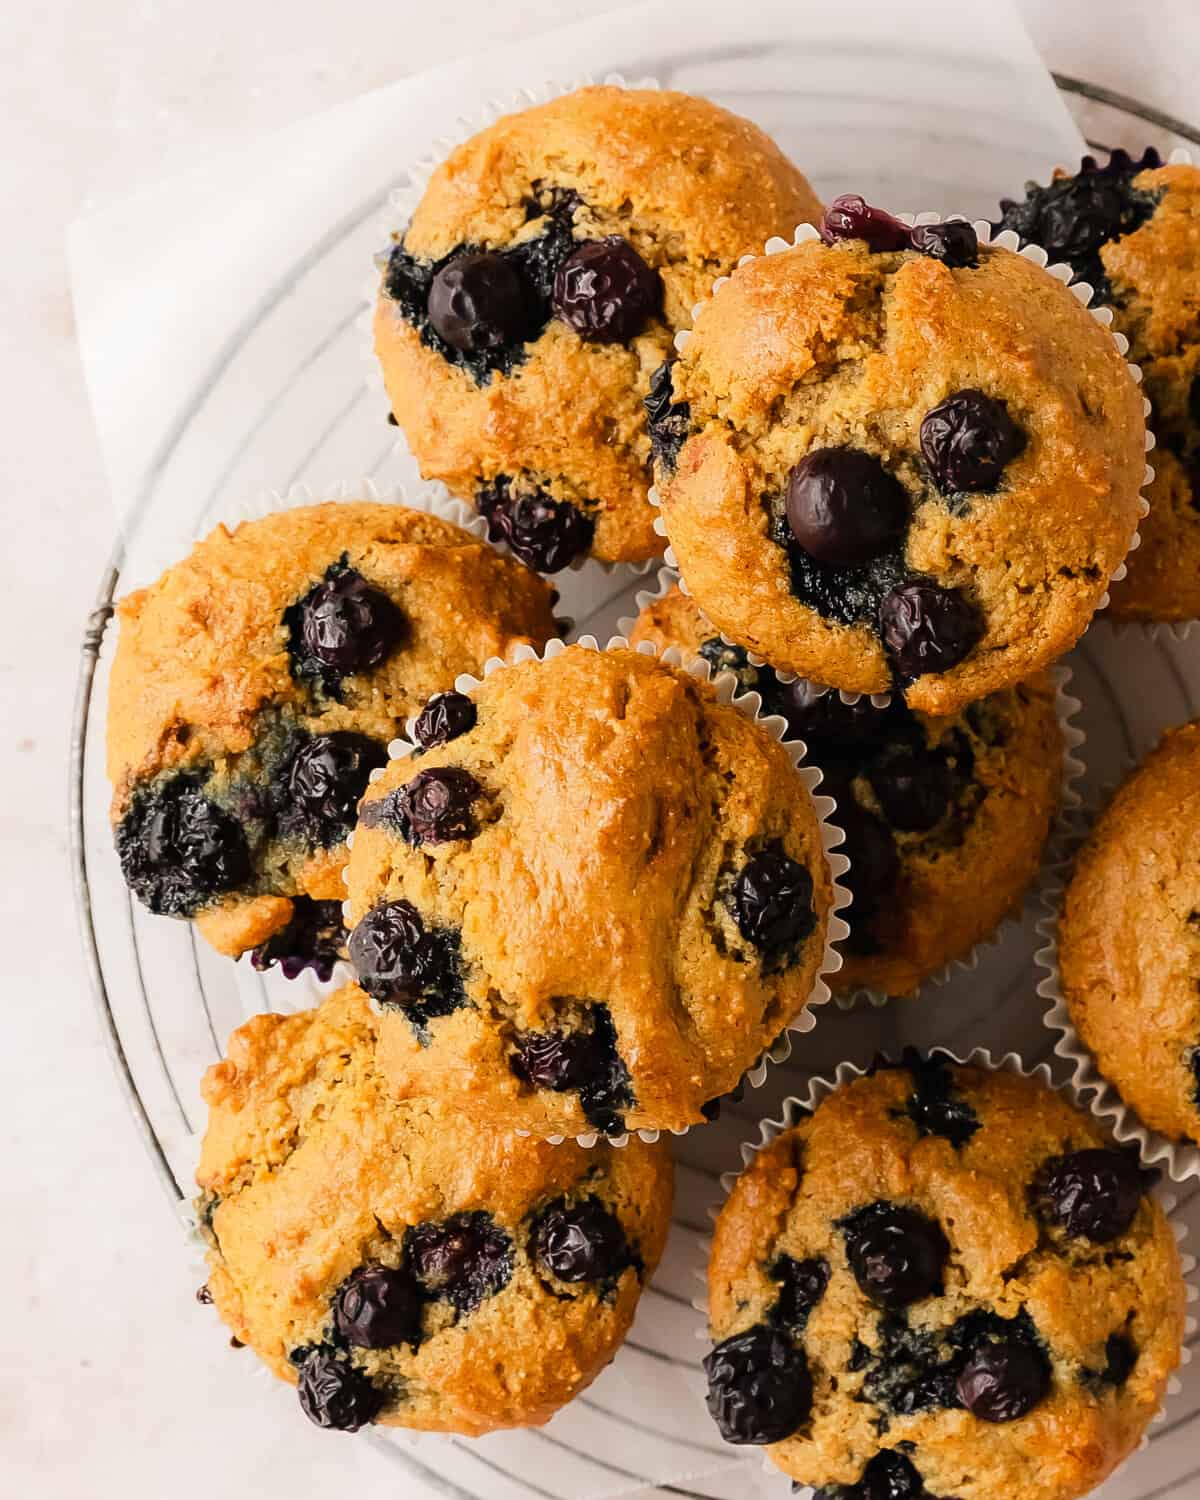 These almond flour blueberry muffins are quick and easy,  gluten-free muffins filled with fresh blueberries. This recipe for blueberry almond flour muffins is easy to make using simple, healthy ingredients. They’re moist, nutty, filled with cinnamon and blueberry flavor and are perfect for breakfasts and snacks. 